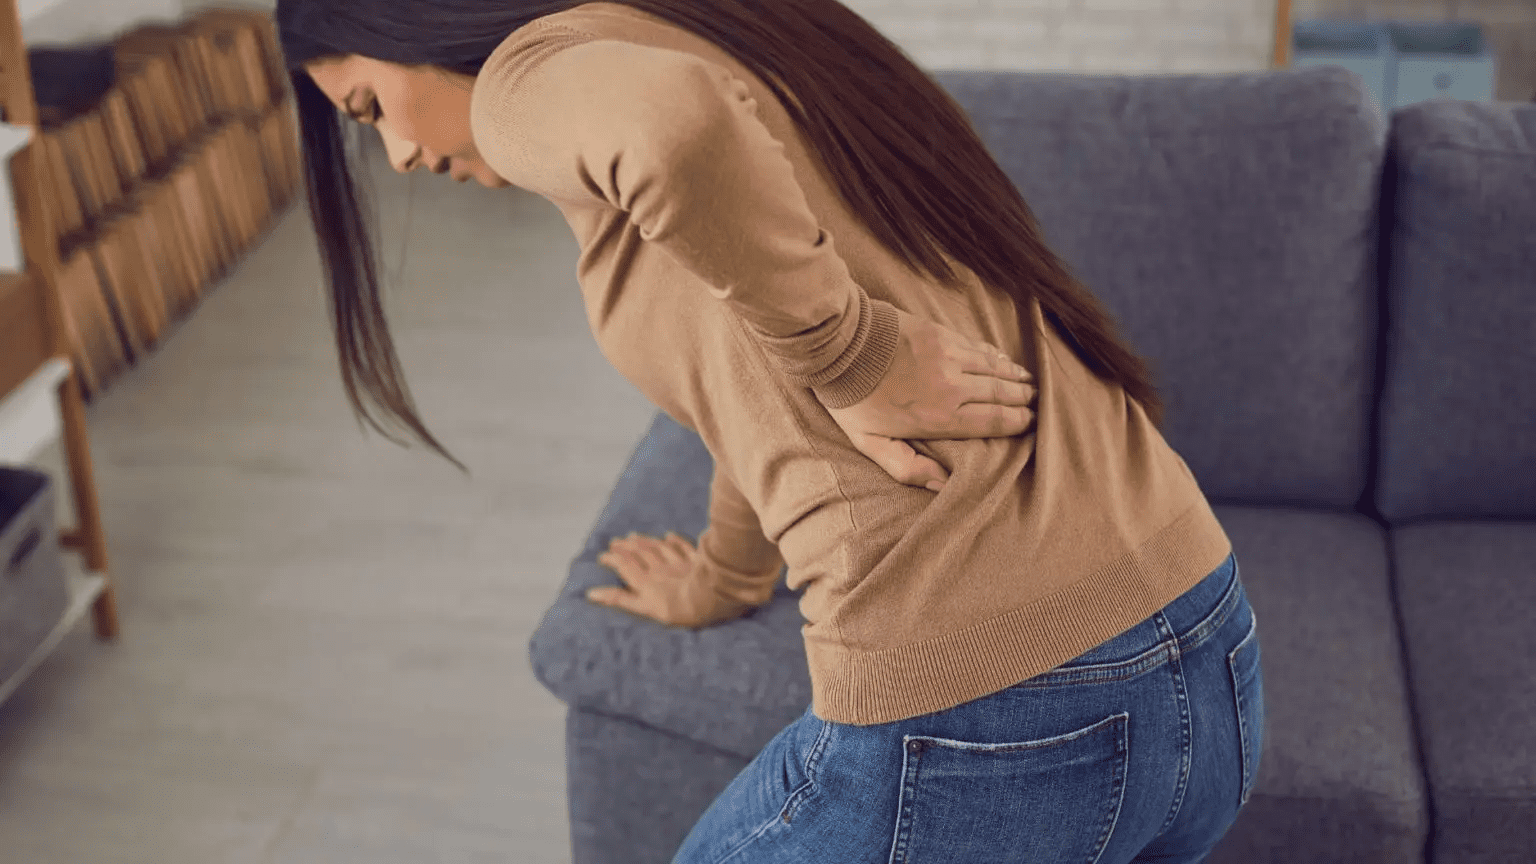 What are Ways to Reduce Your Chronic Sciatica Pain?